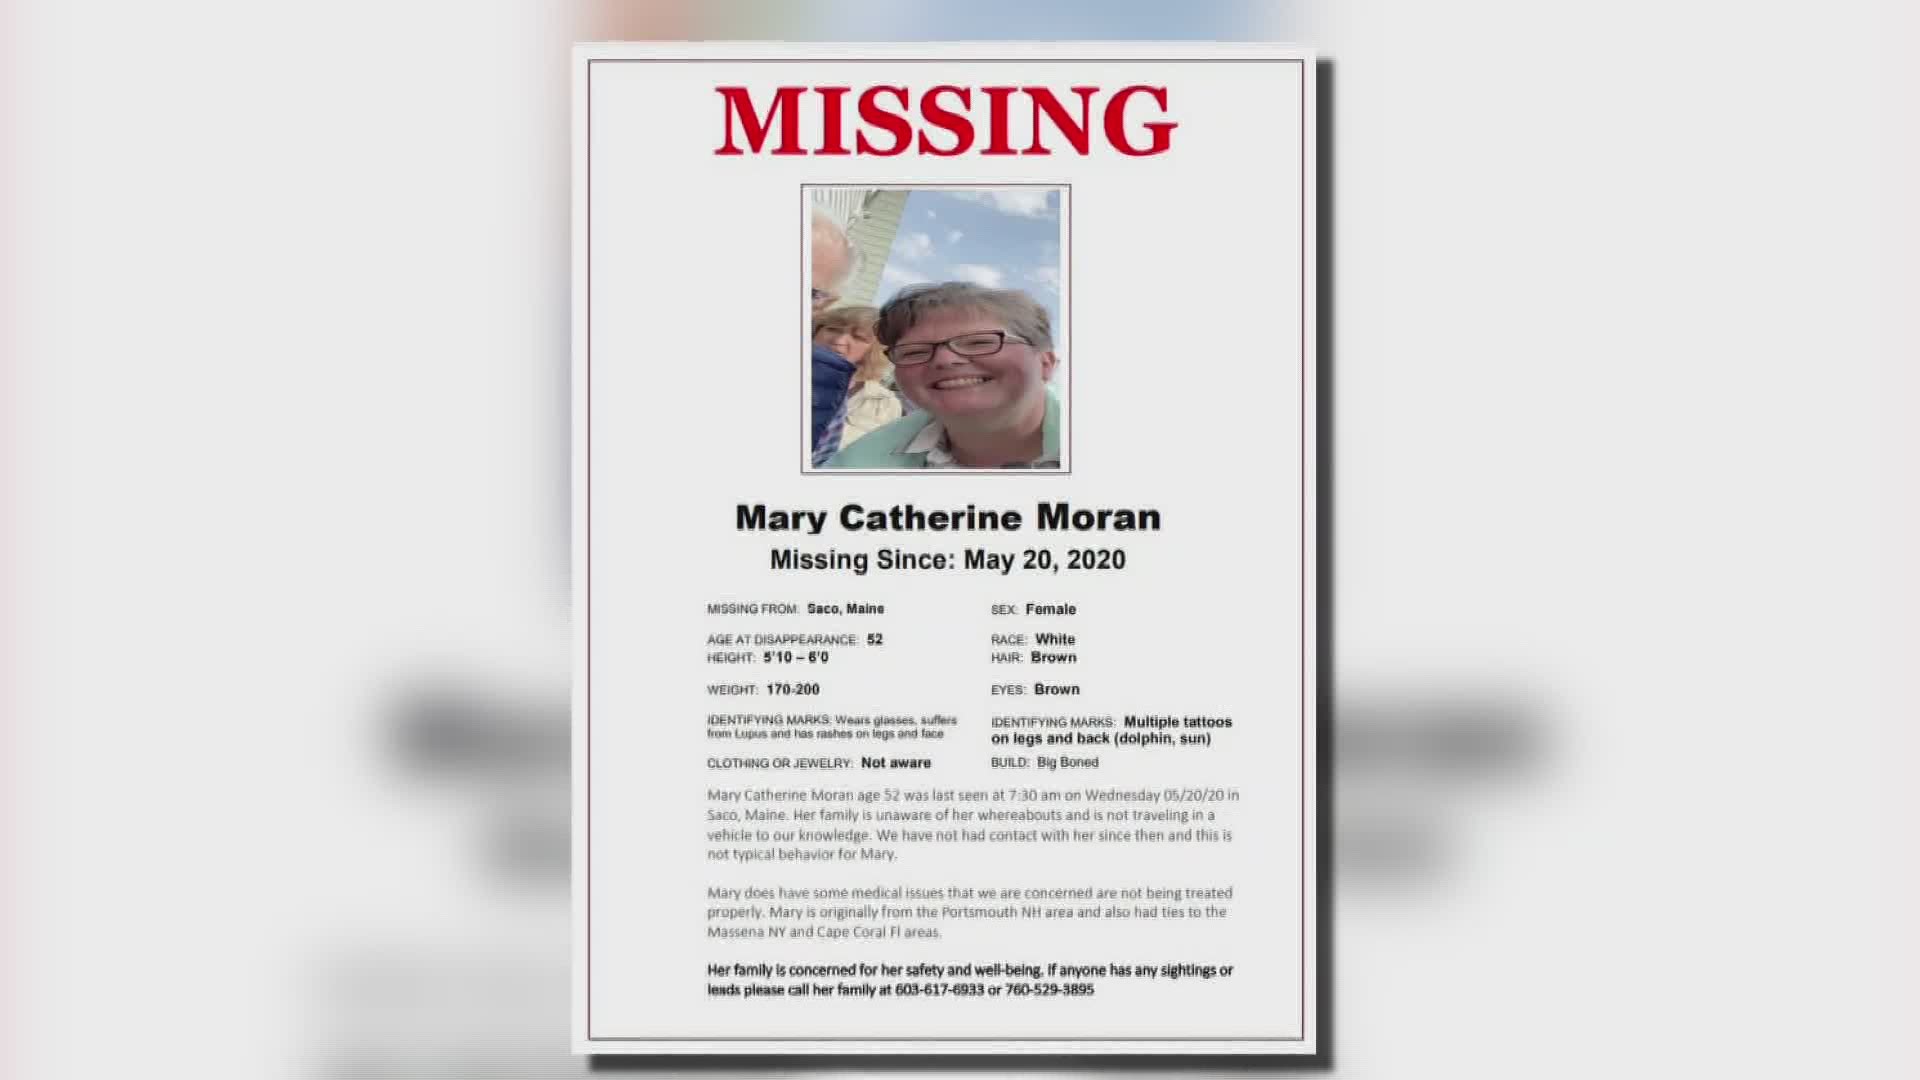 Mary Catherine Moran of Portsmouth, New Hampshire was last seen in Saco on Wednesday around 7:30 PM.